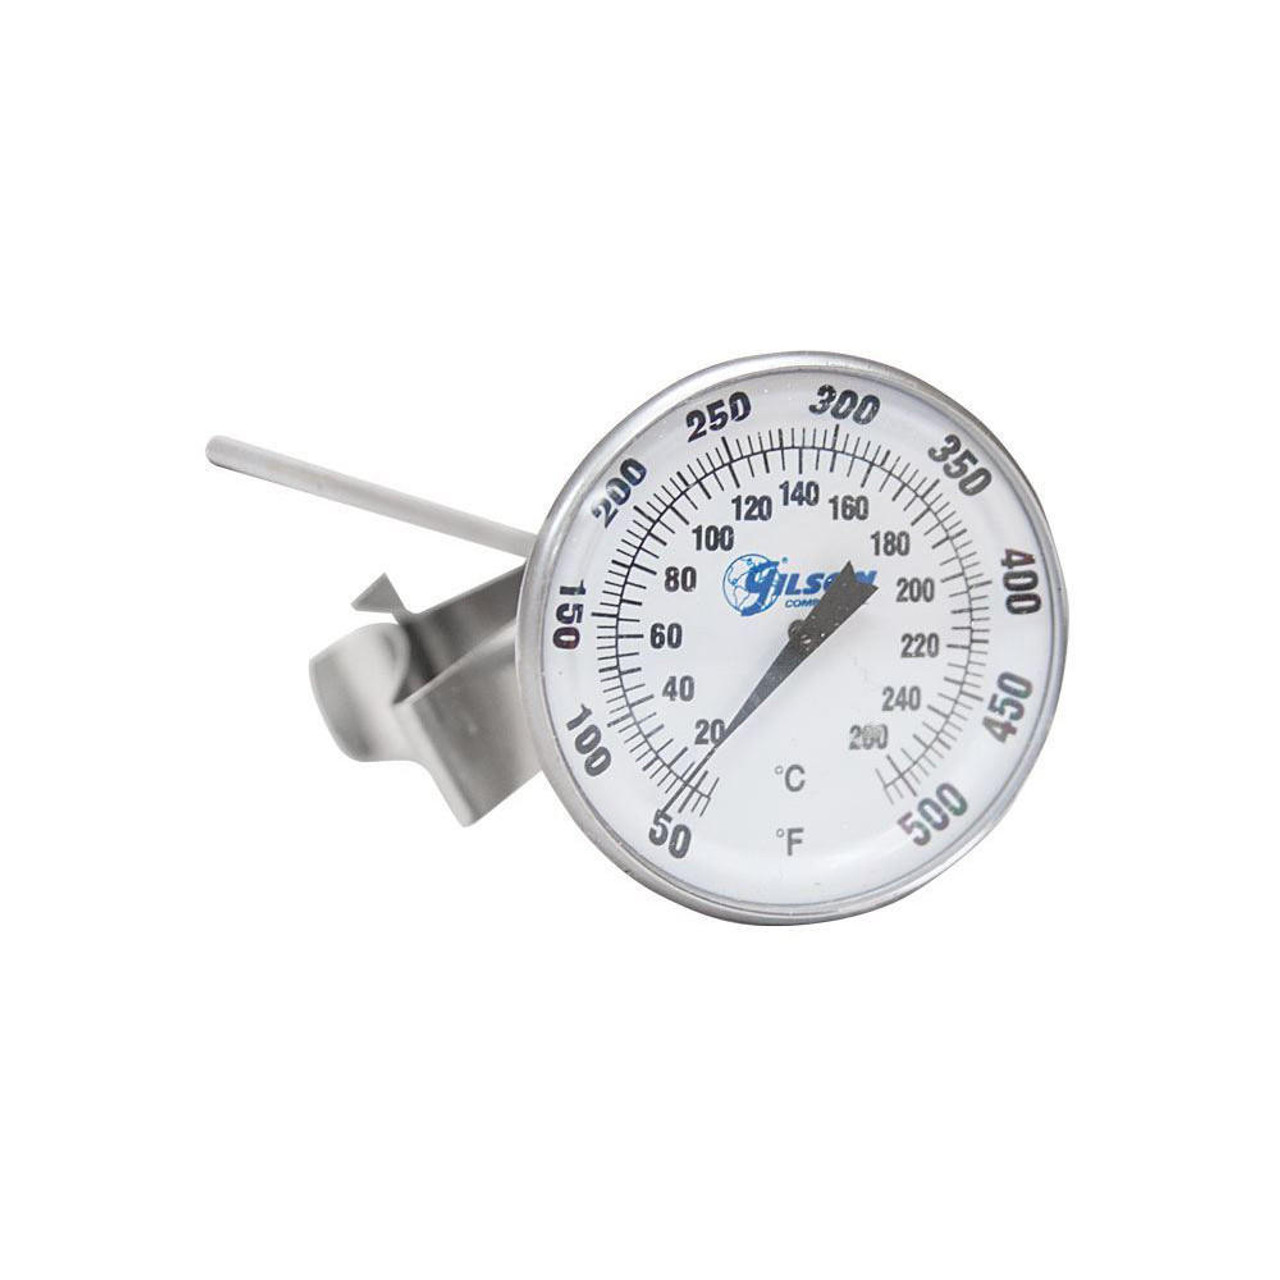 https://cdn11.bigcommerce.com/s-zgzol/images/stencil/1280x1280/products/8814/237458/gilson-company-dual-range-dial-lab-thermometer-50-to-500f-10-to-265c__95704.1698295647.jpg?c=2